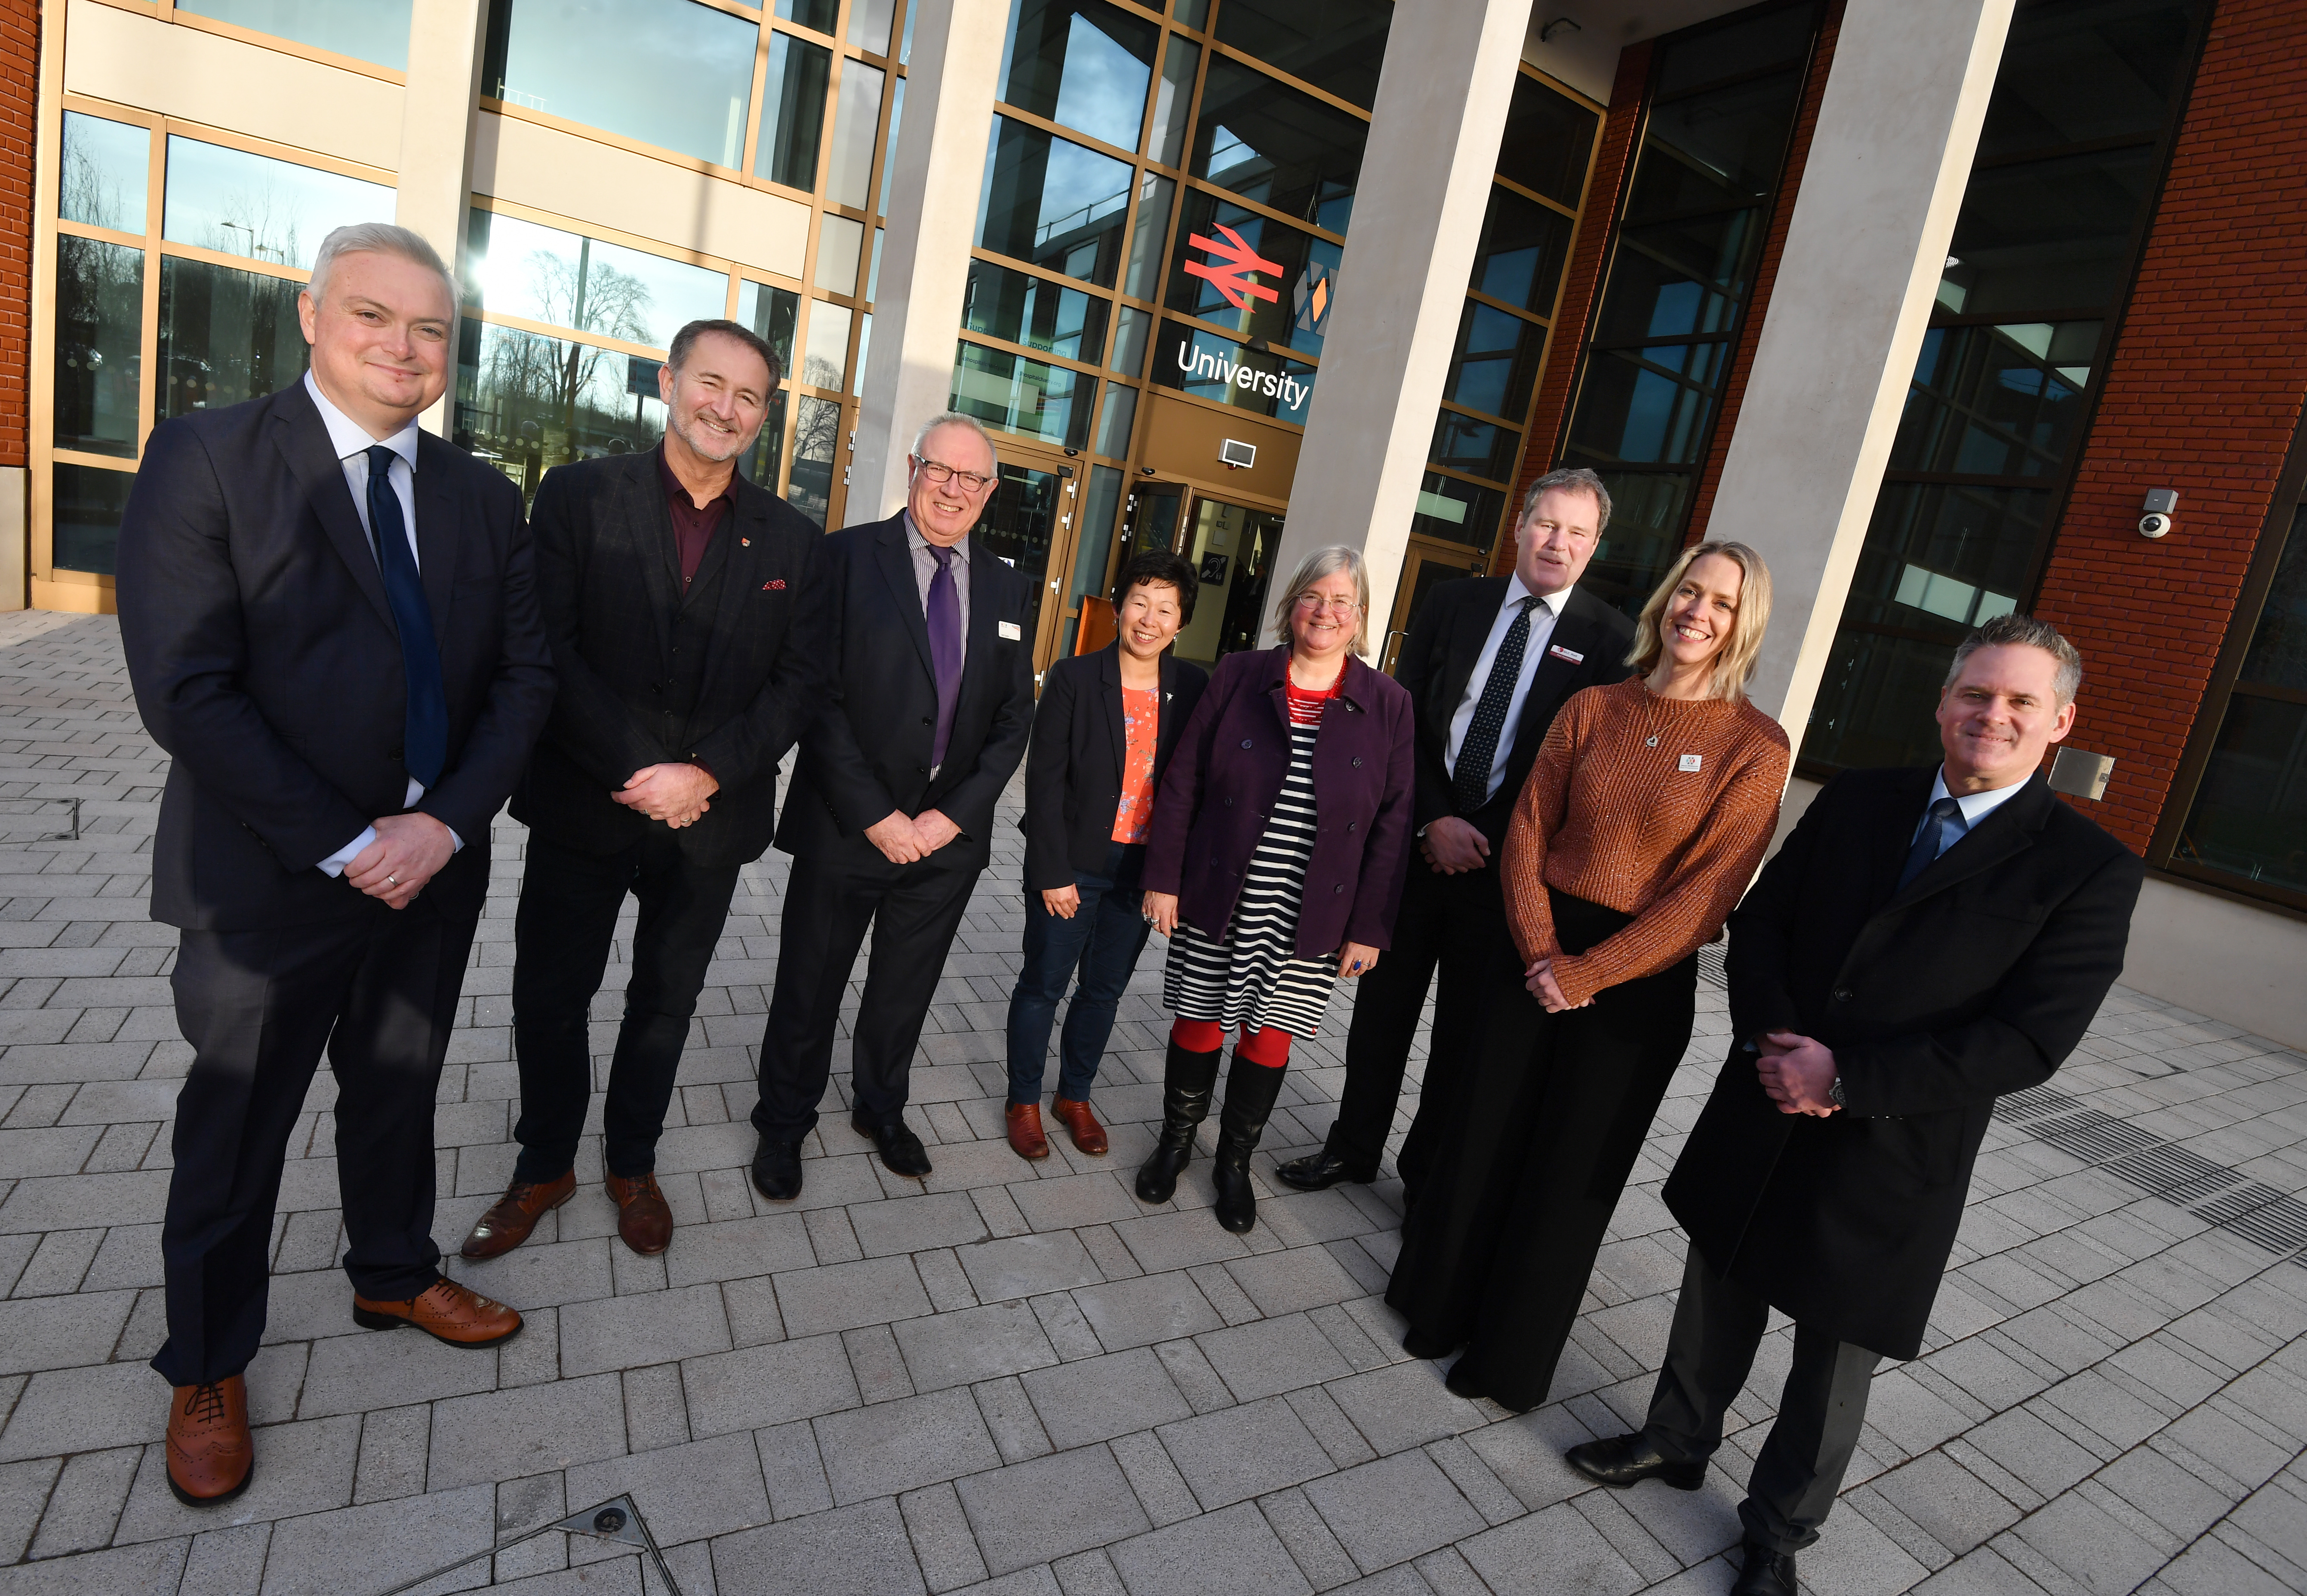 Representatives from some of the project partners standing outside the new University Railway Station